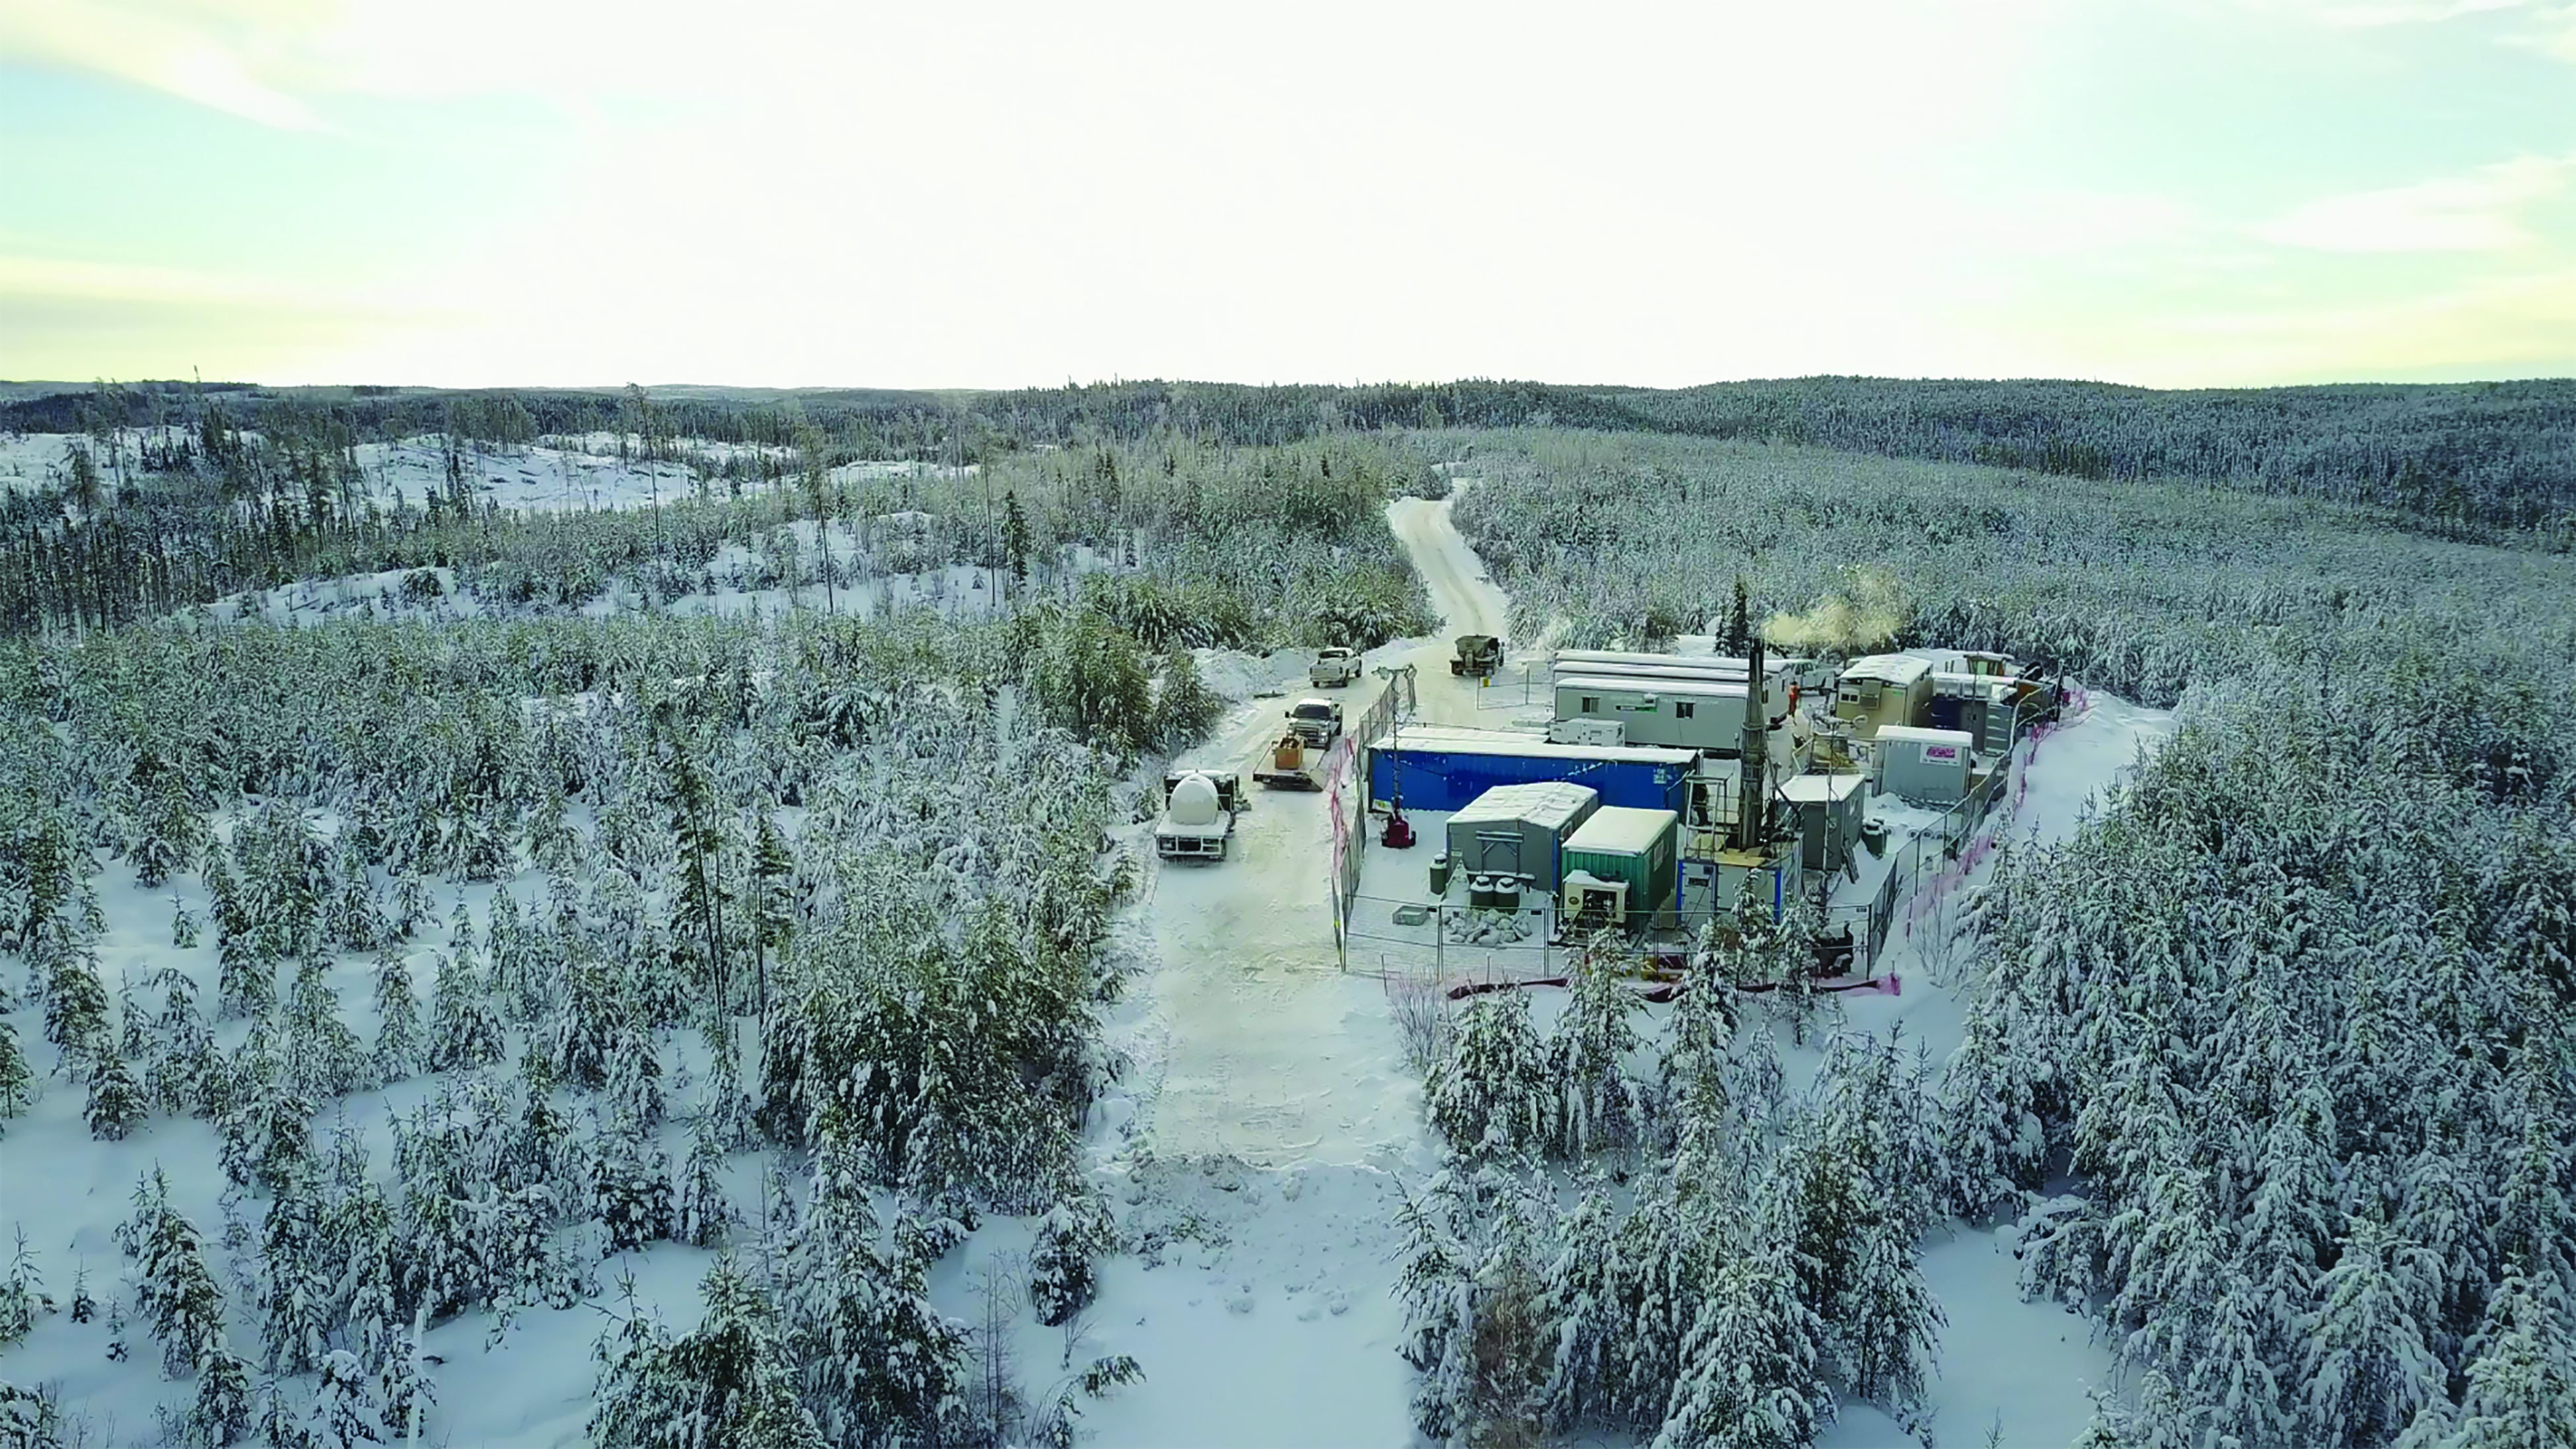 A photo of the first borehole location in Ignace, Ontario.